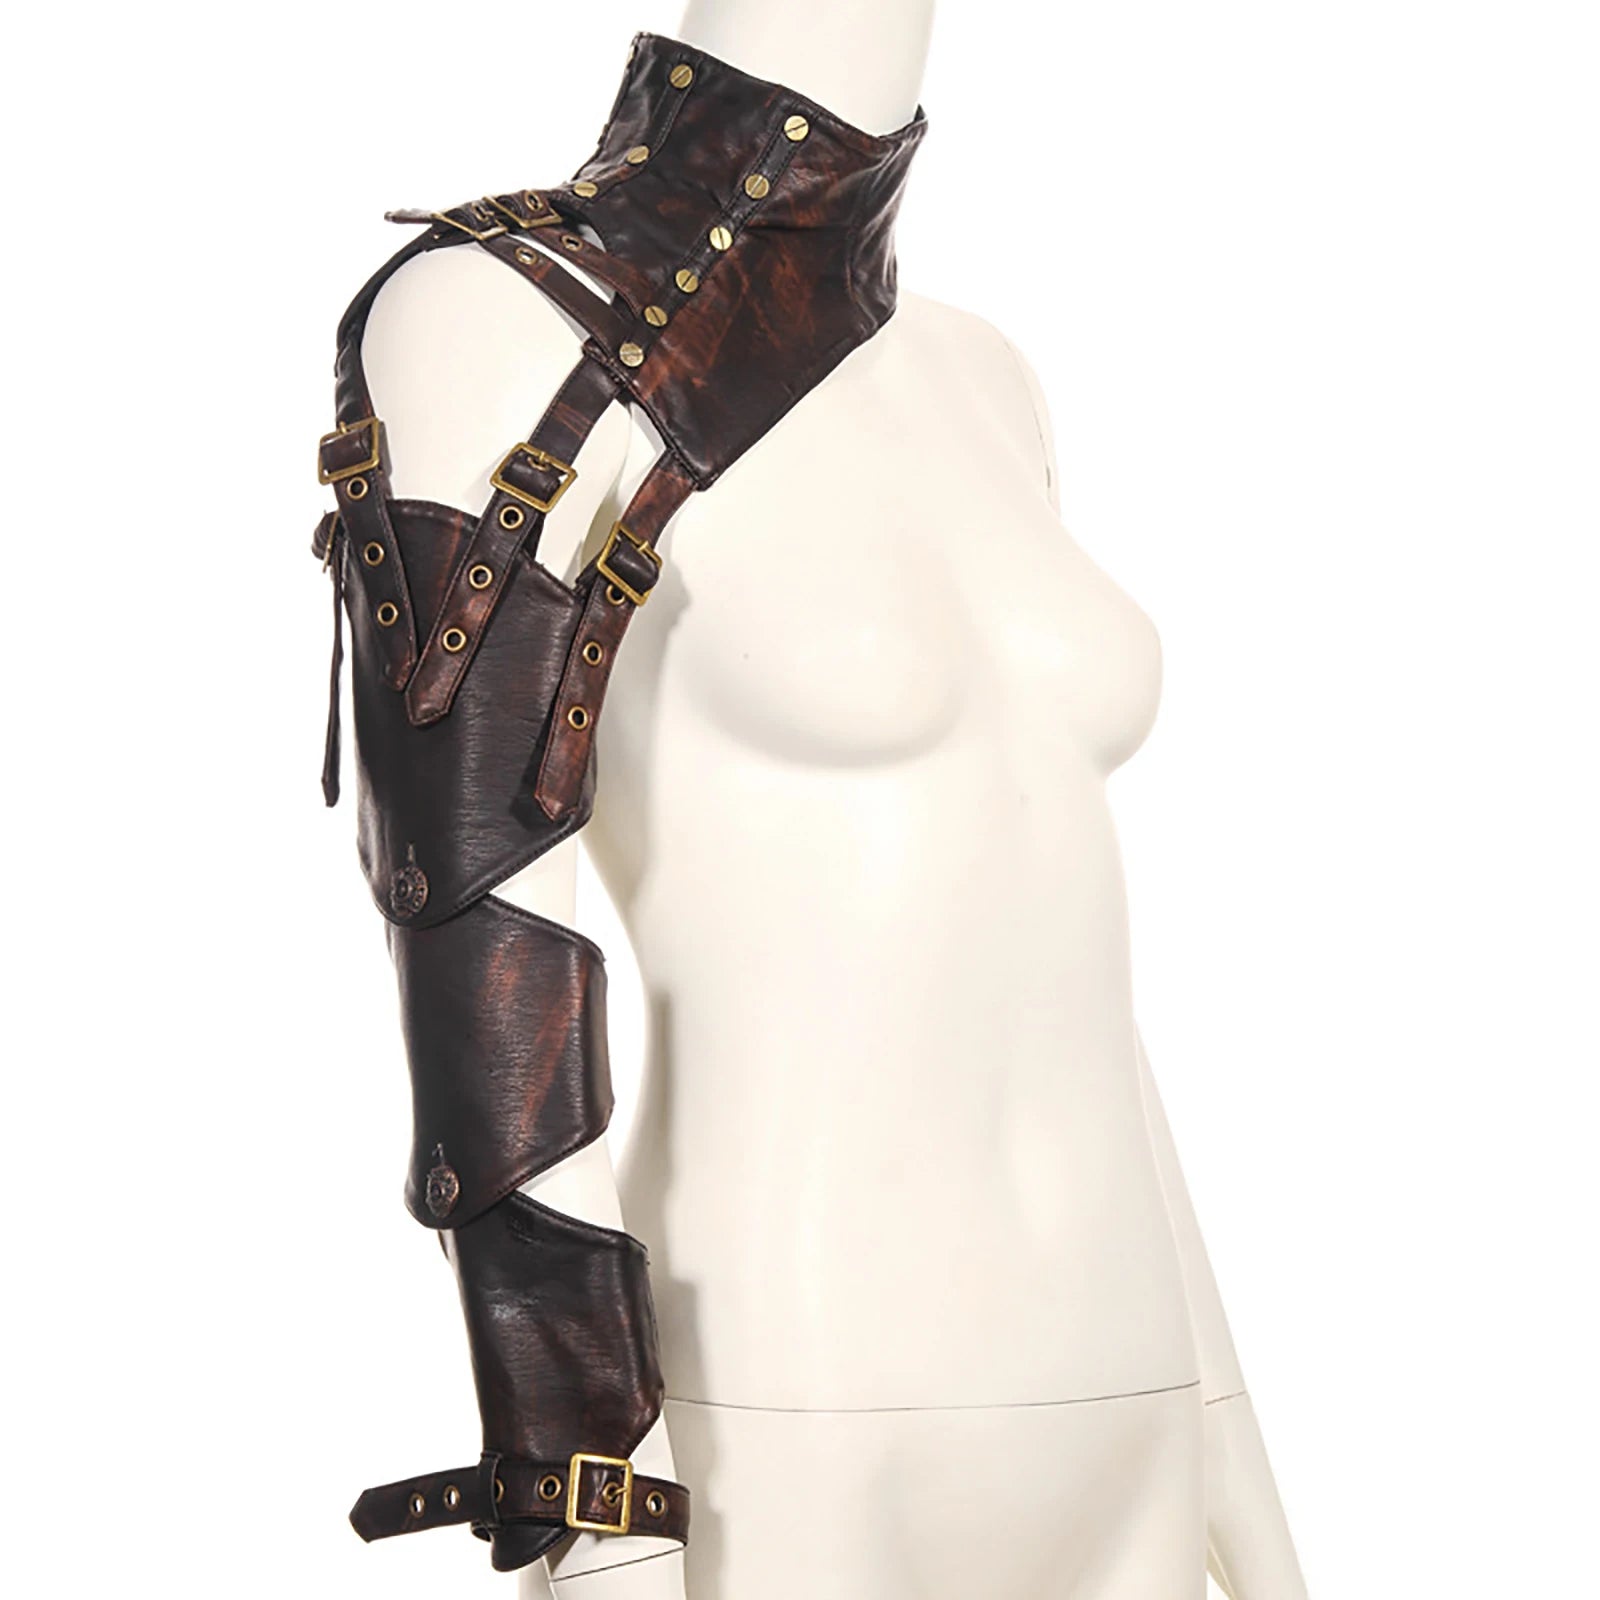 A mannequin displays a Maramalive™ Adult Steampunk Retro Leather Arm Sheath Armor Costume One Shoulder Faux Leather Corset warmer bolero Shrug Jacket Coffee with multiple straps and metal buckles, perfect for punk costume accessories or adding flair to cosplay costumes.